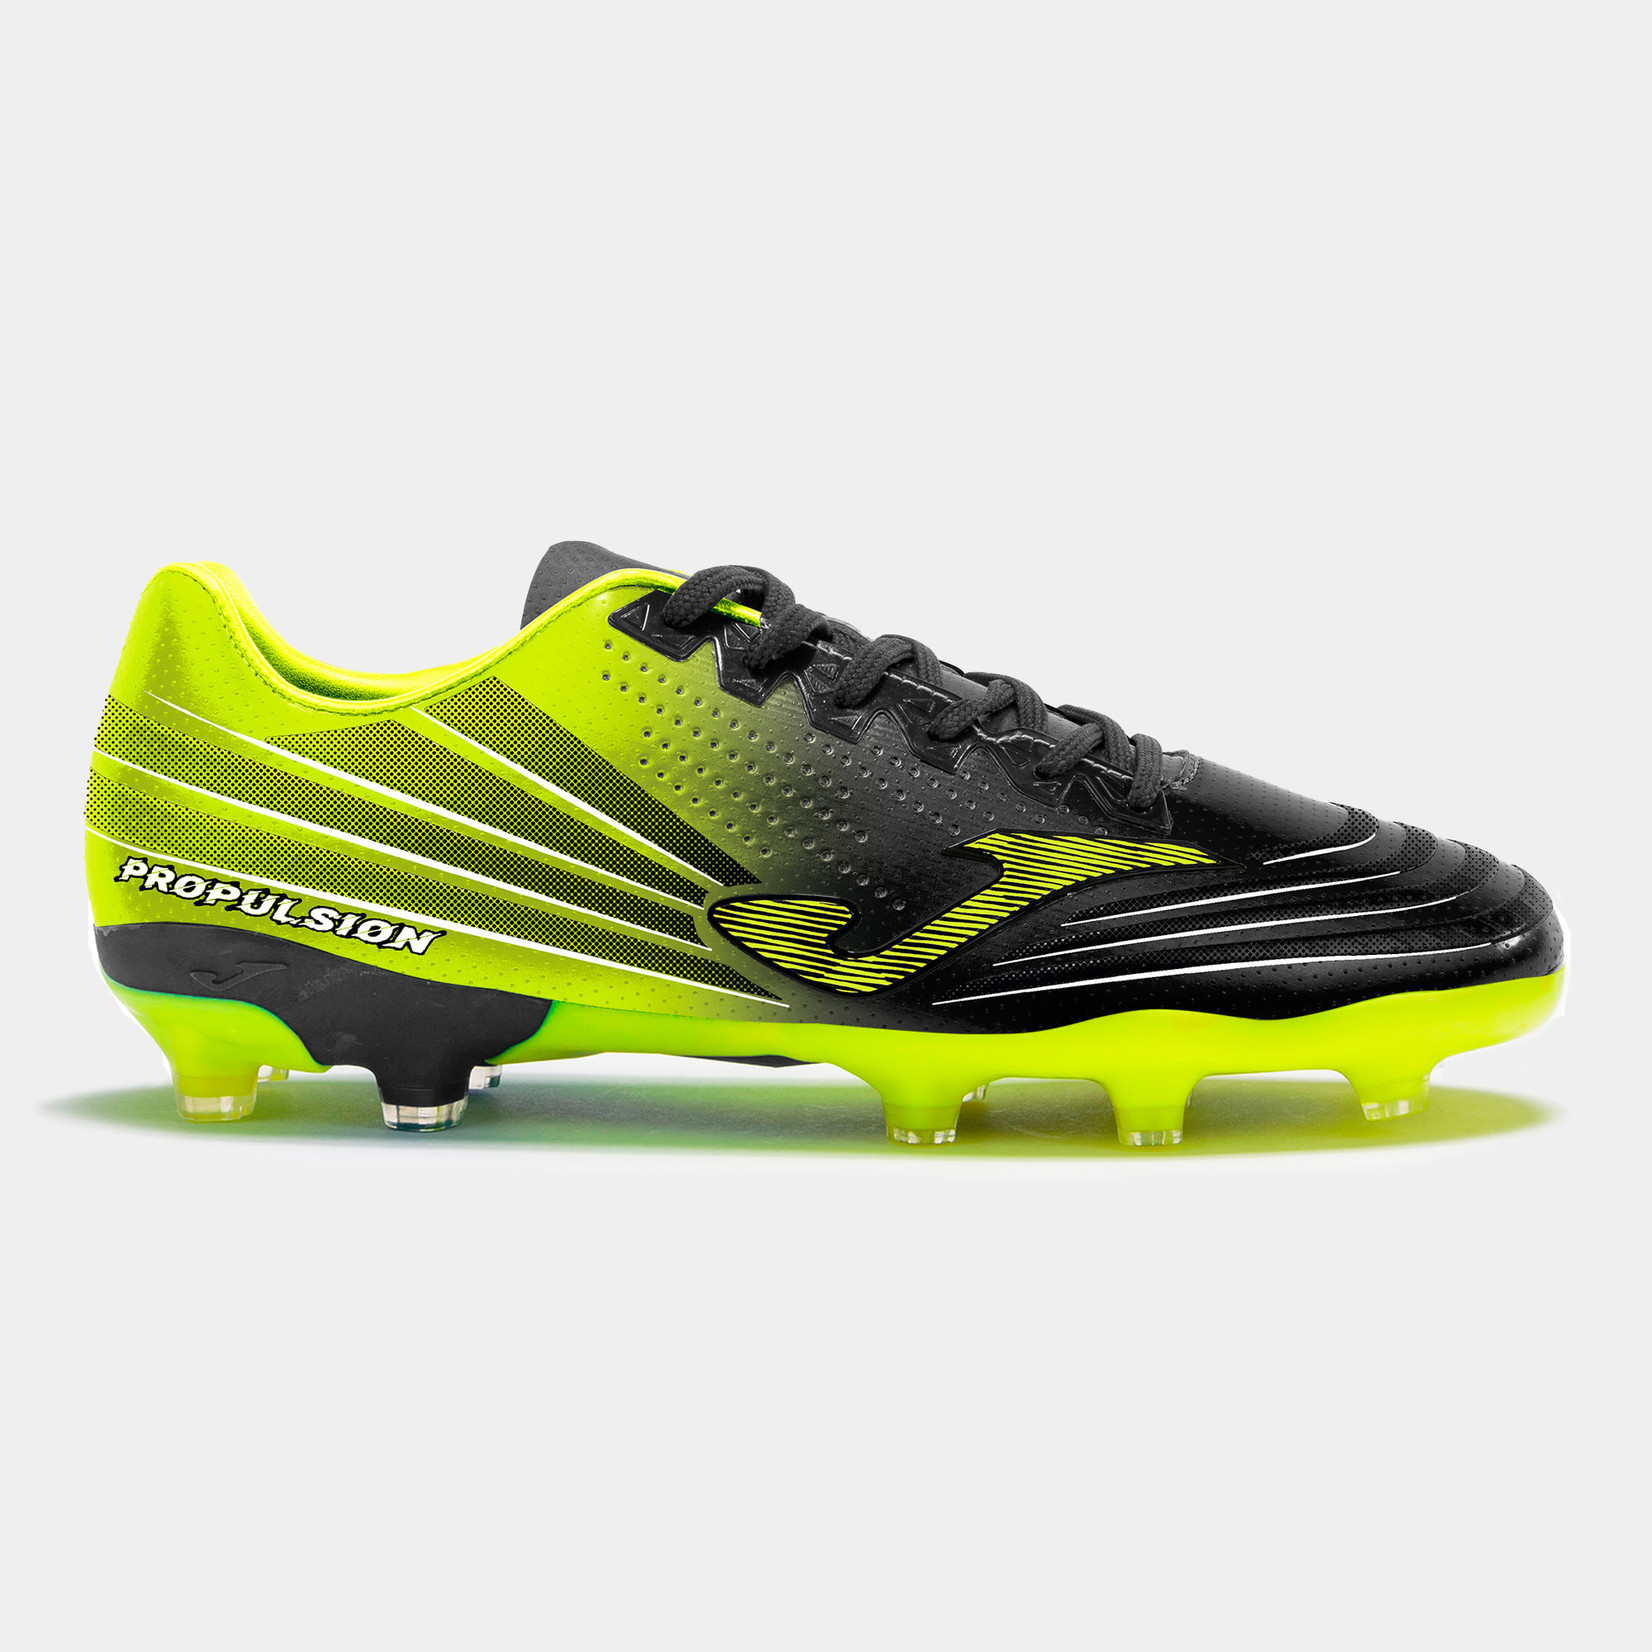 Joma Propulsion JR 2201 Black Lime Firm Ground with Light Up Spikes